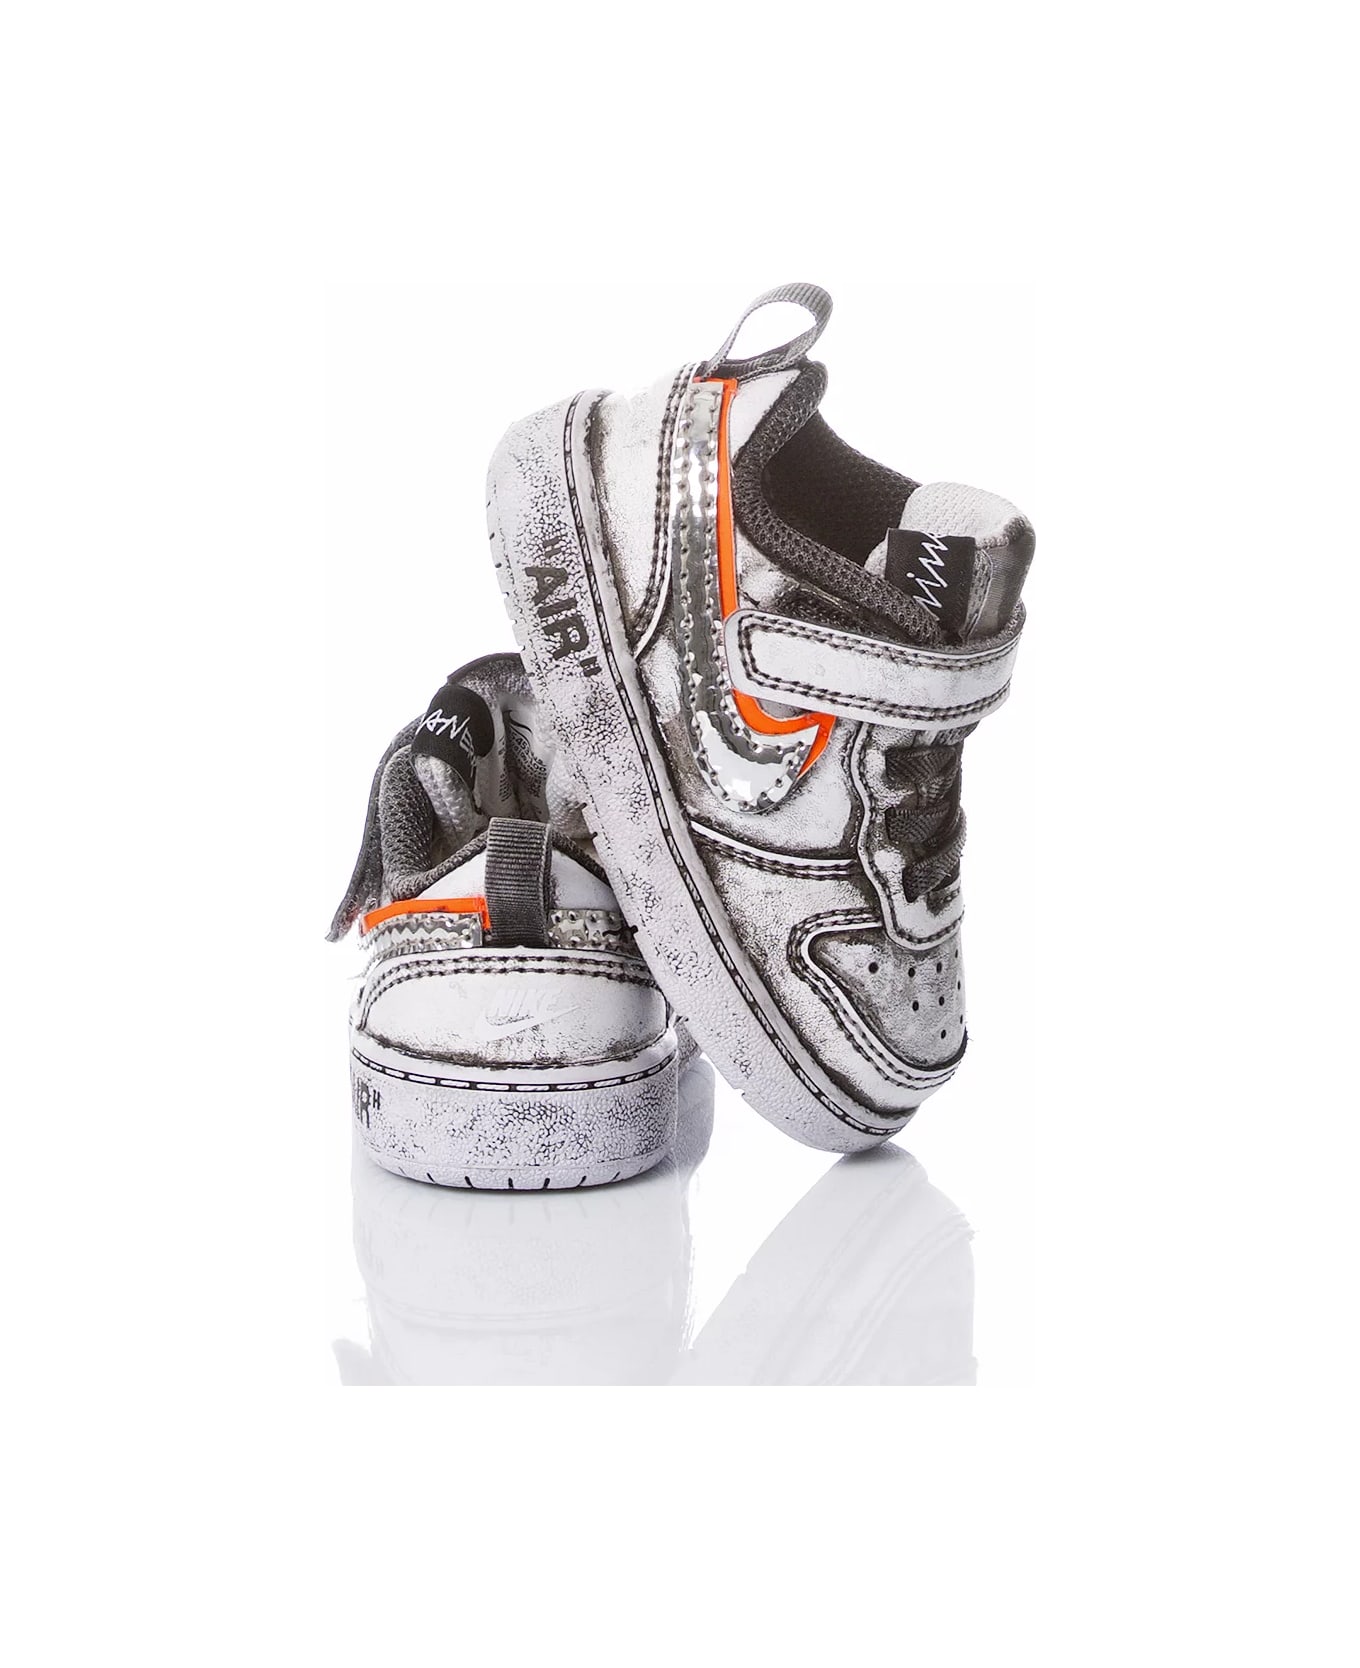 Mimanera Nike Baby: Customize Your Little Shoe!